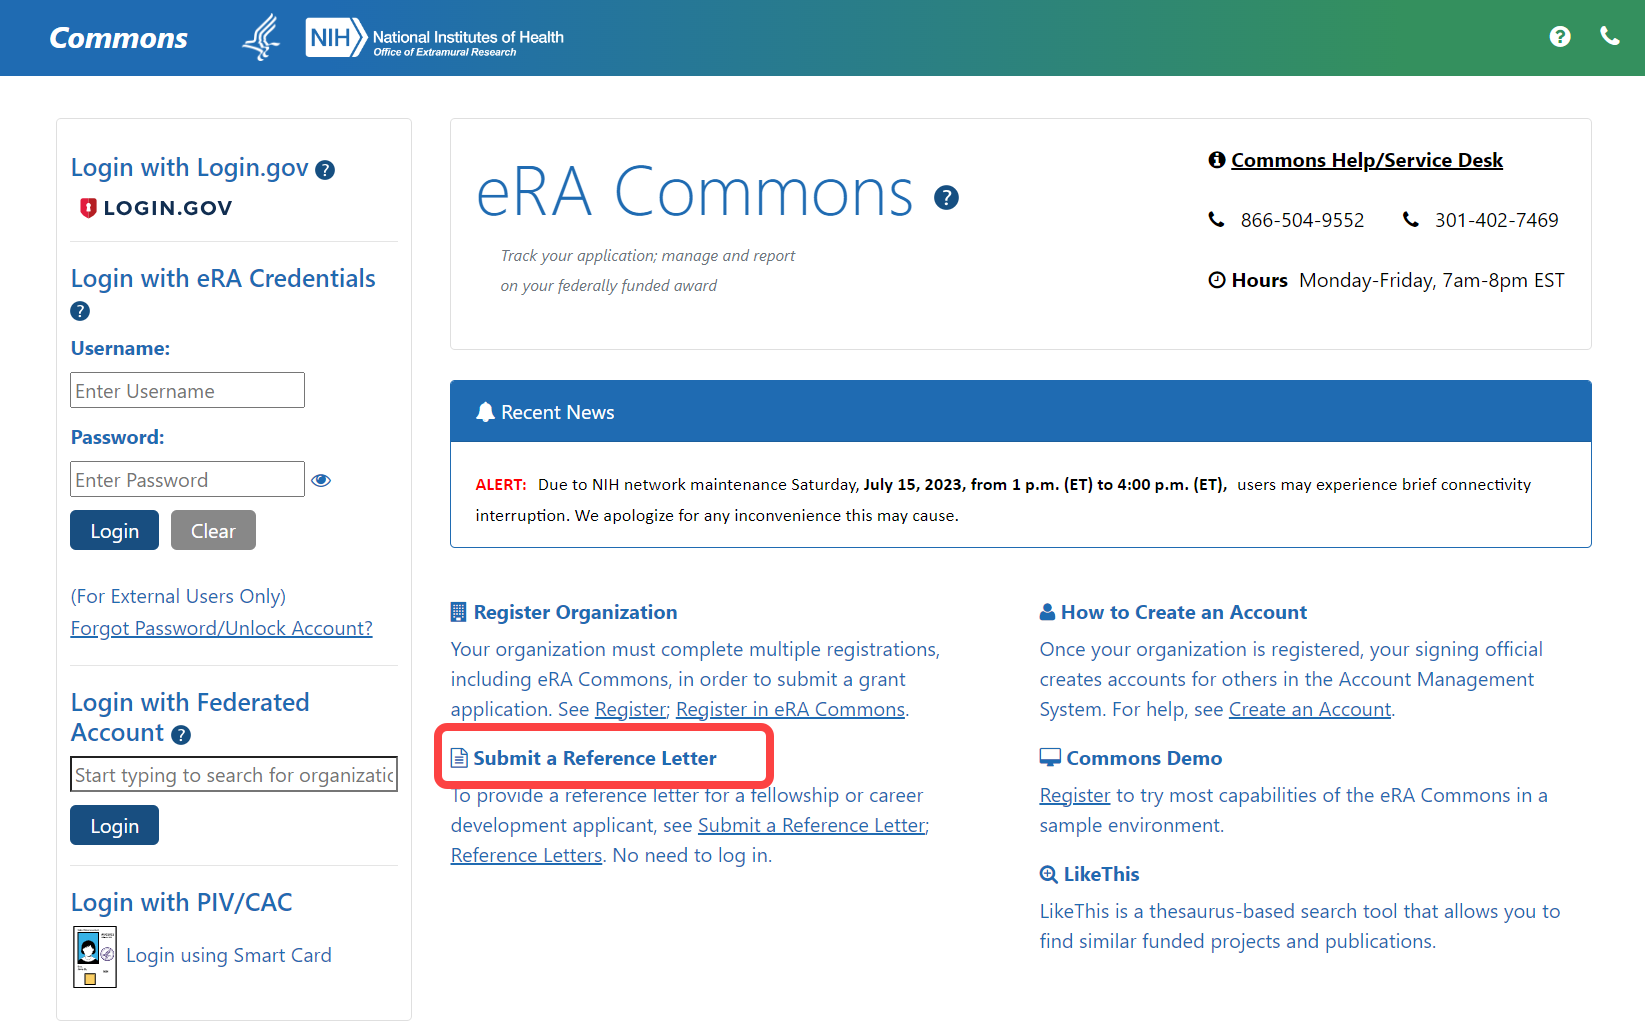 Commons home page highlighting reference letter link